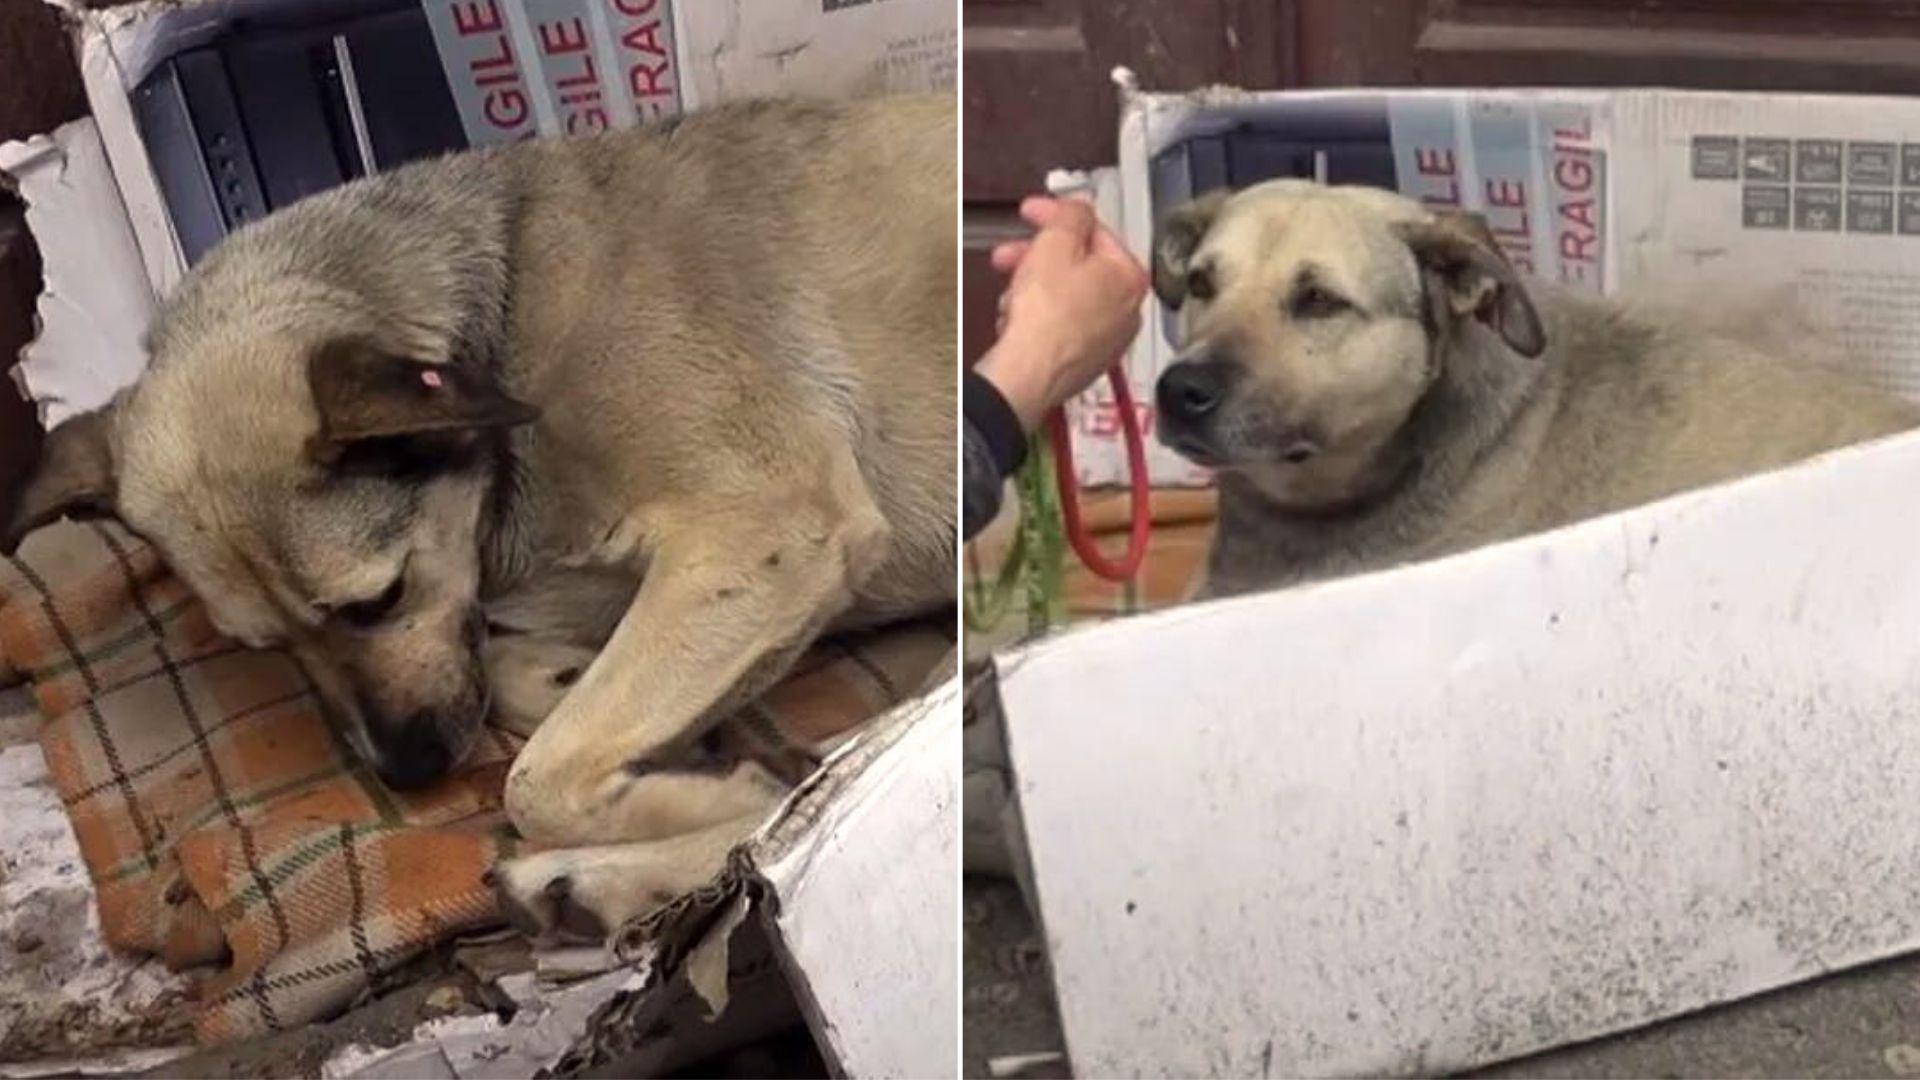 Stray Dog Living On The Streets All Of Her Life Gets A New Chance When She Meets A Kind Tourist